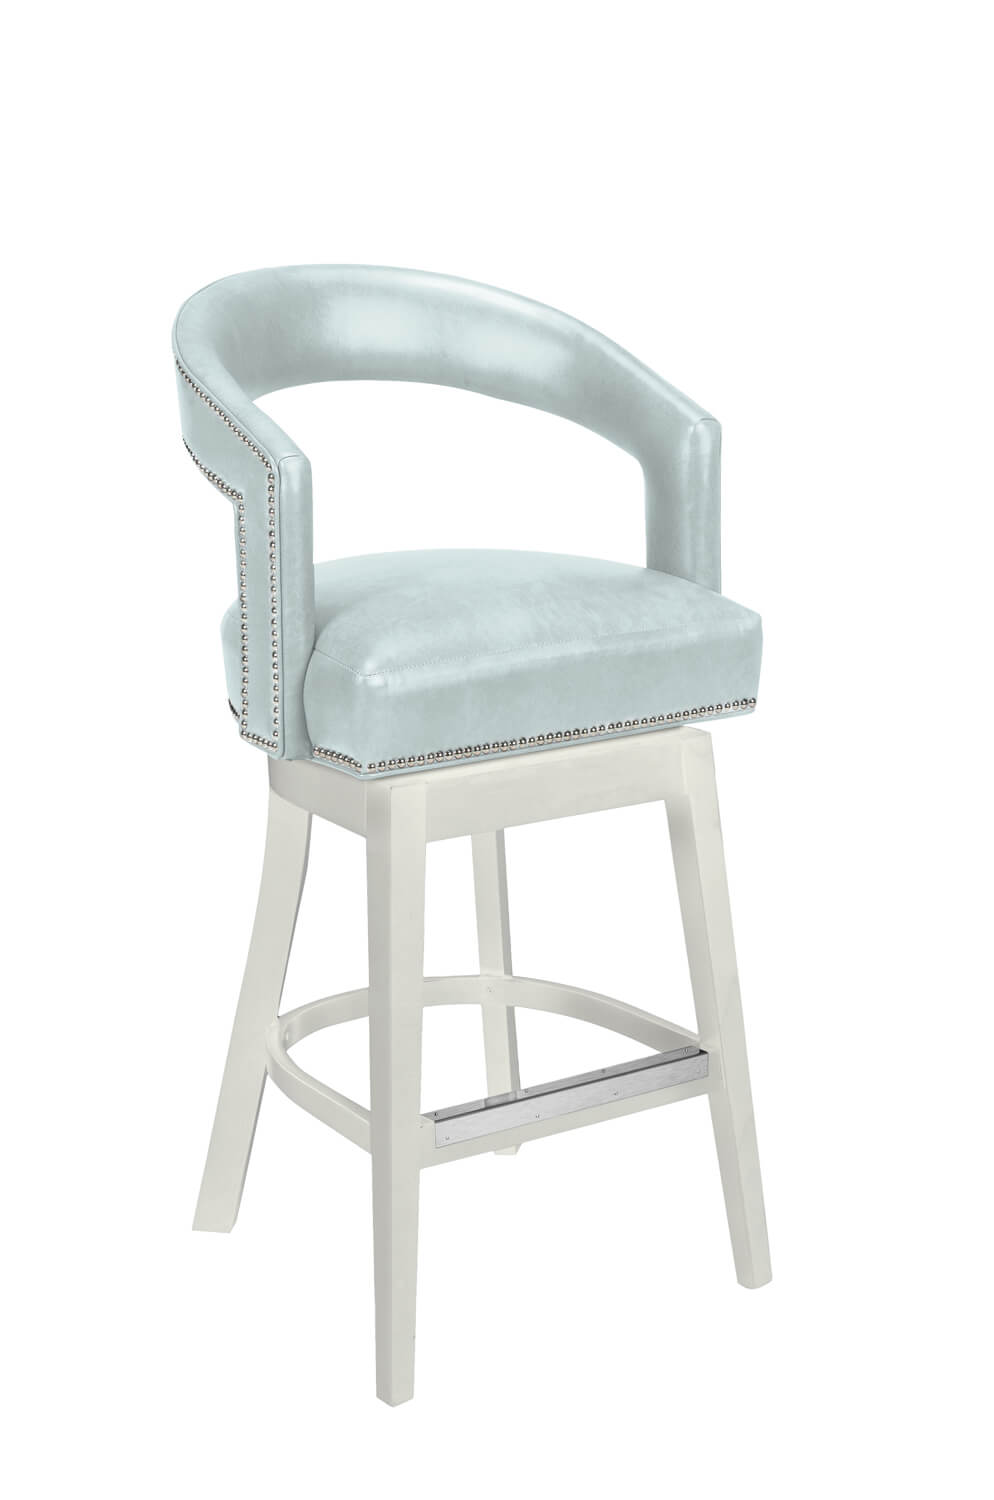 Style Upholstering's #17 White Wood Bar Stool with Blue Leather and Silver Nailheads